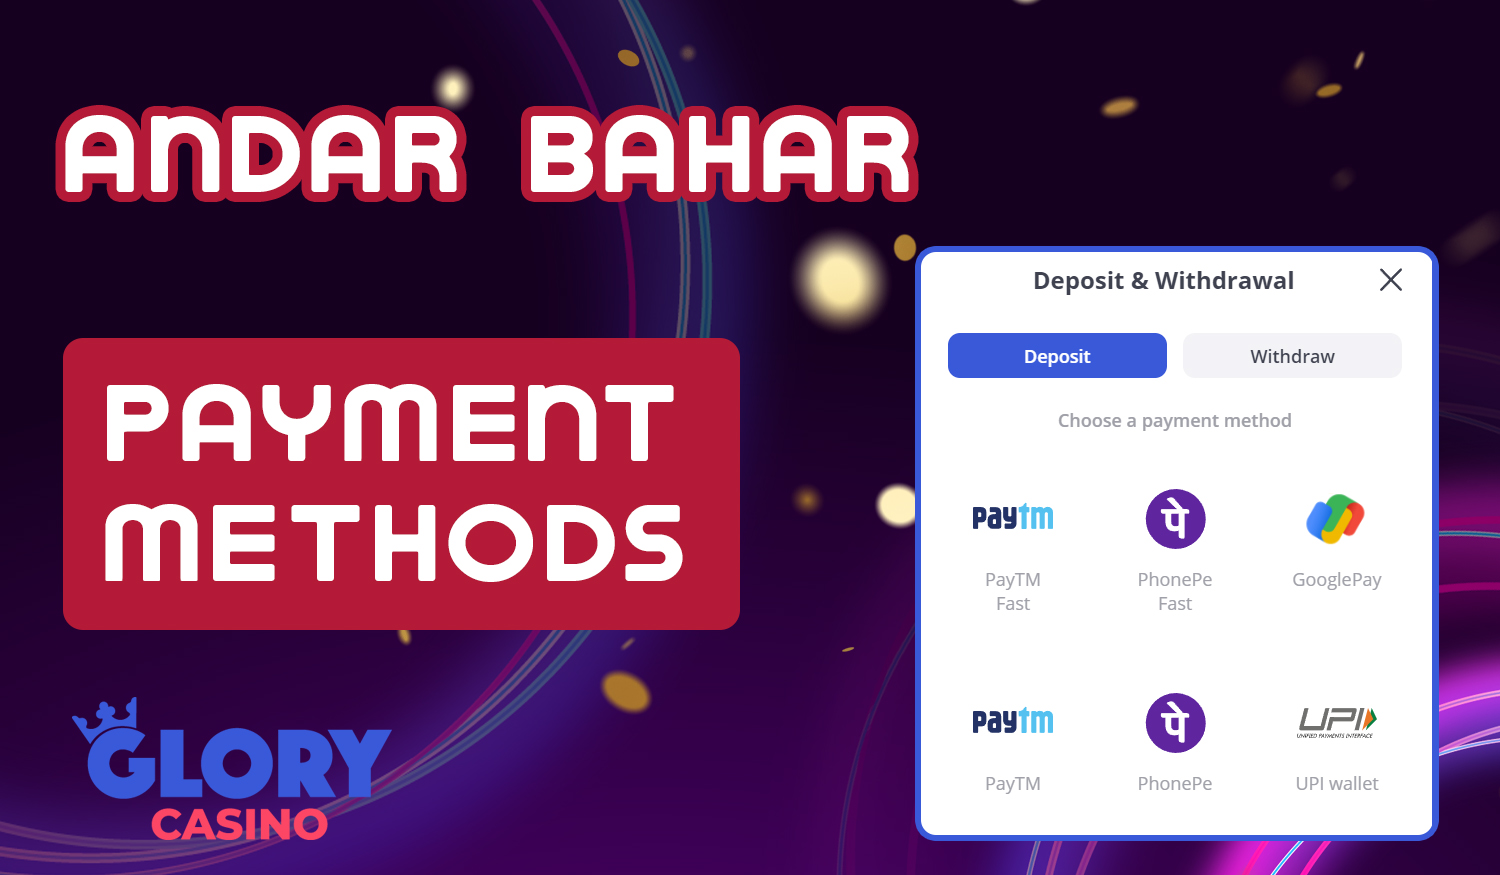 How to deposit and withdraw funds won at Andar Bahar at Glory casino